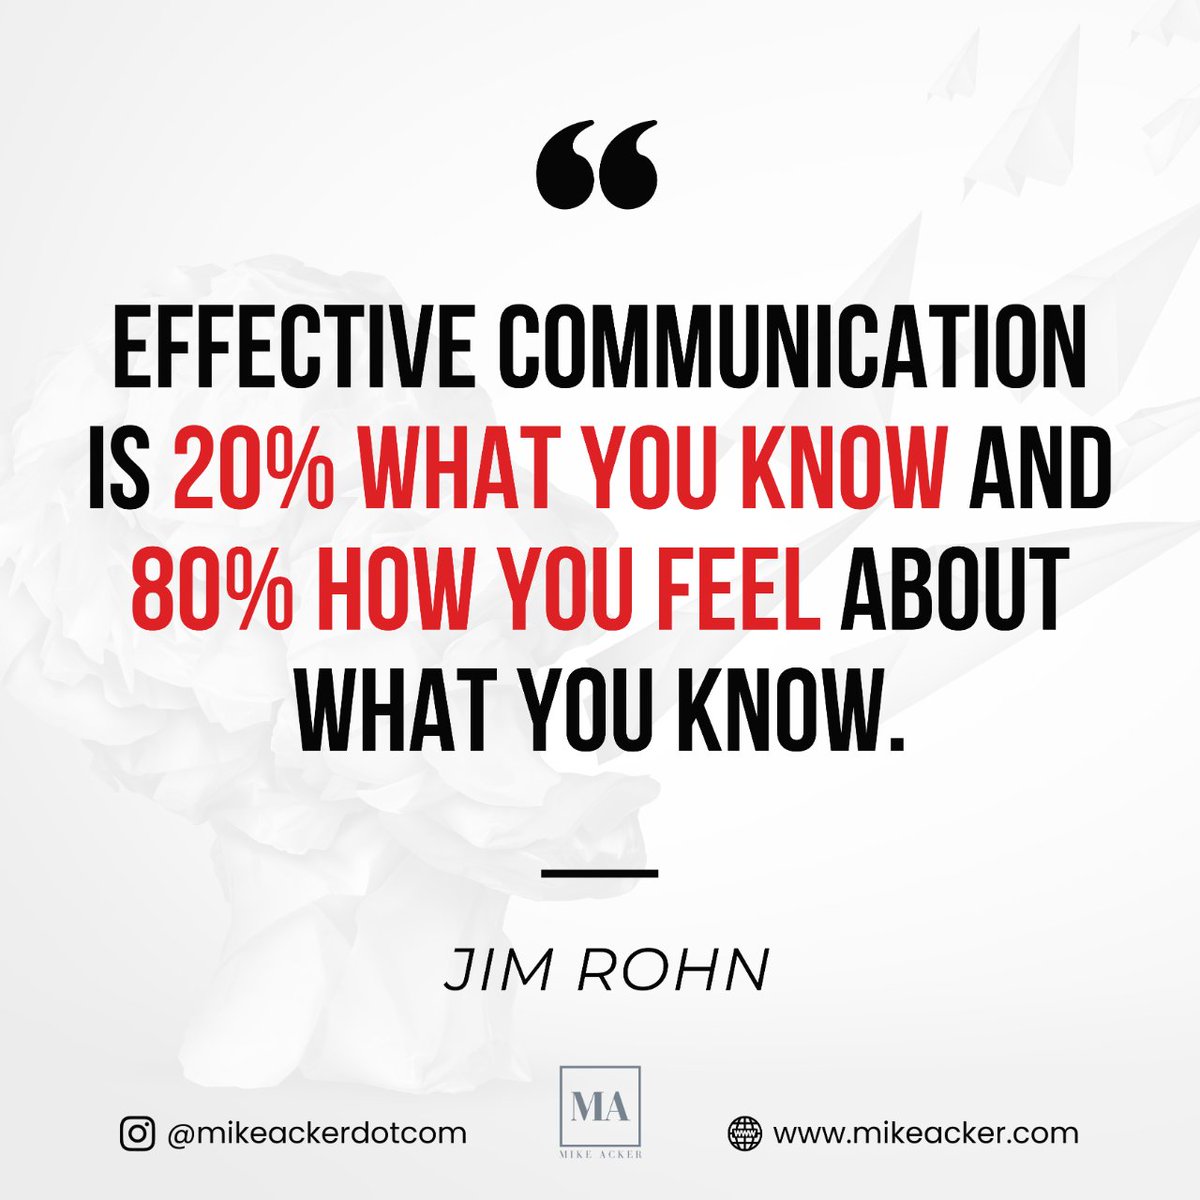 Sharing some inspiration from Jim Rohn.

It’s a potent reminder that effective communication relies not just on knowledge but on emotional engagement. 

How passionately do you feel about your message?

#jimrohn  #quoteoftheday